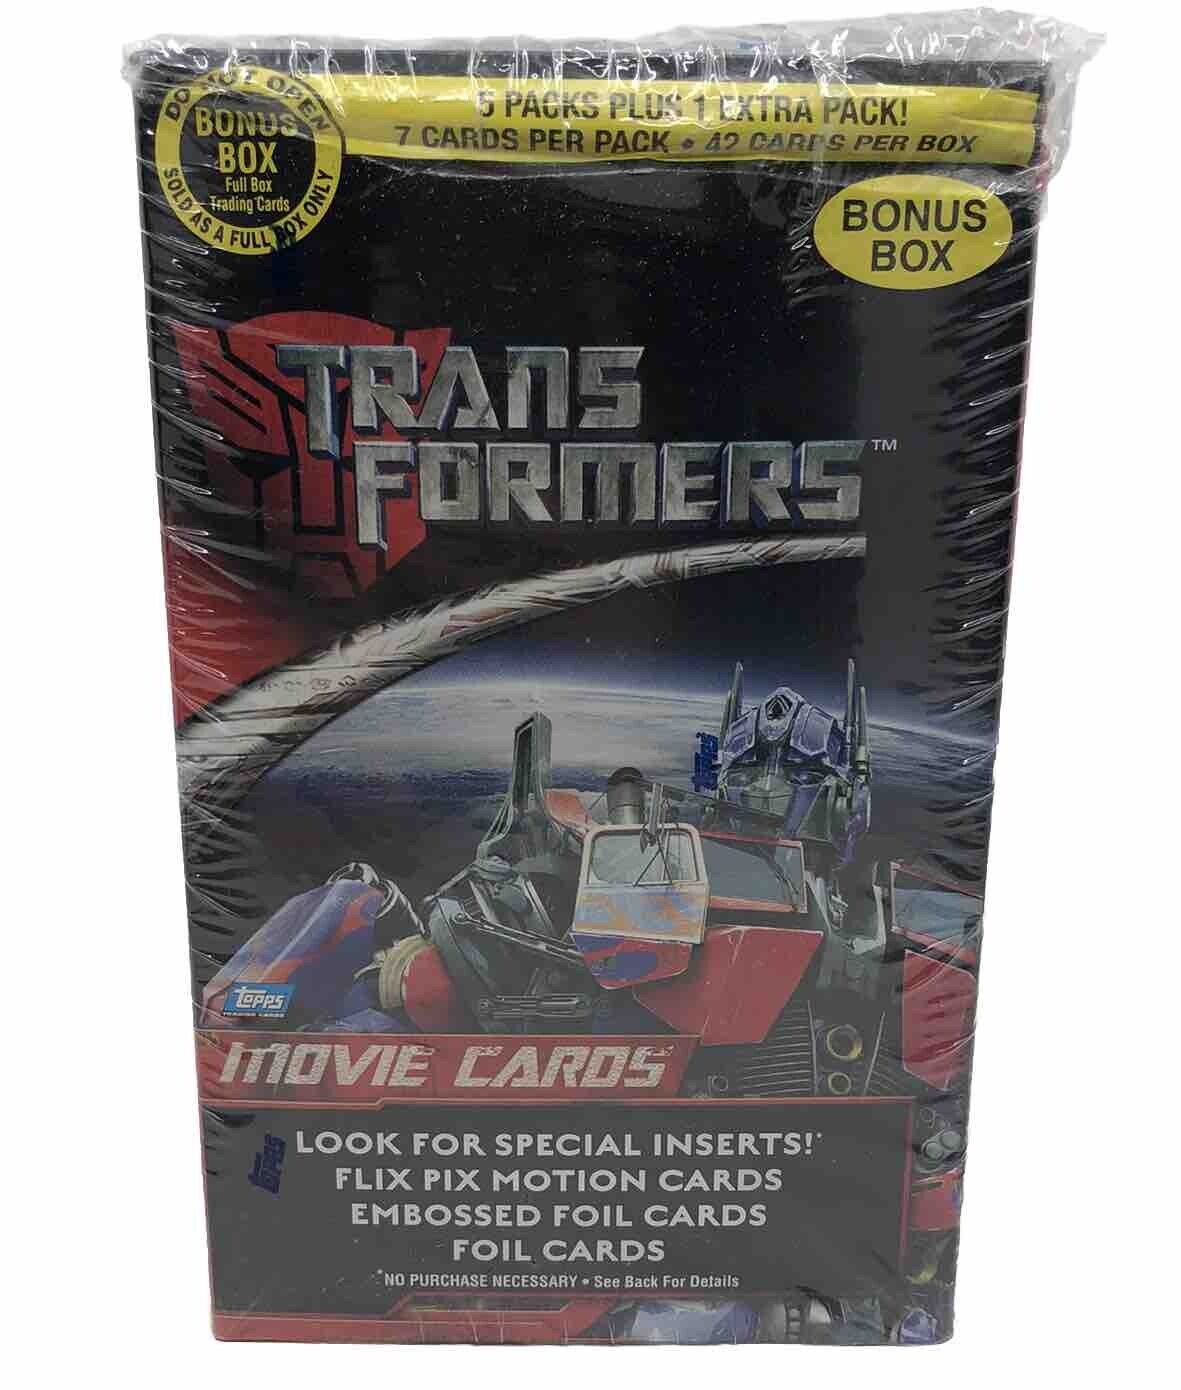 2007 Topps “TRANSFORMERS” Movie Trading Cards 6 Pack Blaster Box